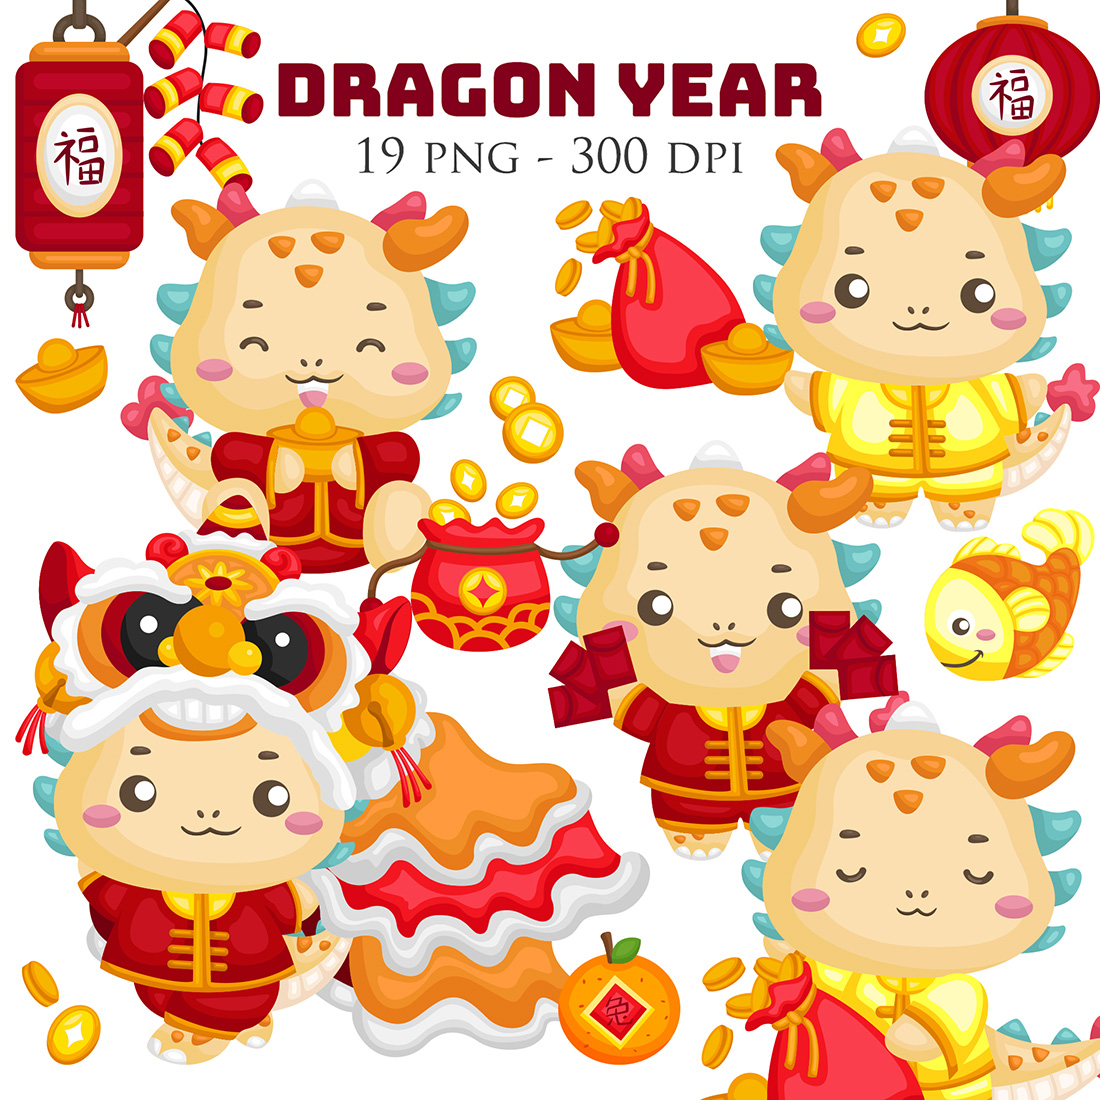 Cute Chinese New Year Lunar Celebration Dragon Year Decoration Background Illustration Vector Clipart Sticker Cartoon Accessories Ornaments cover image.